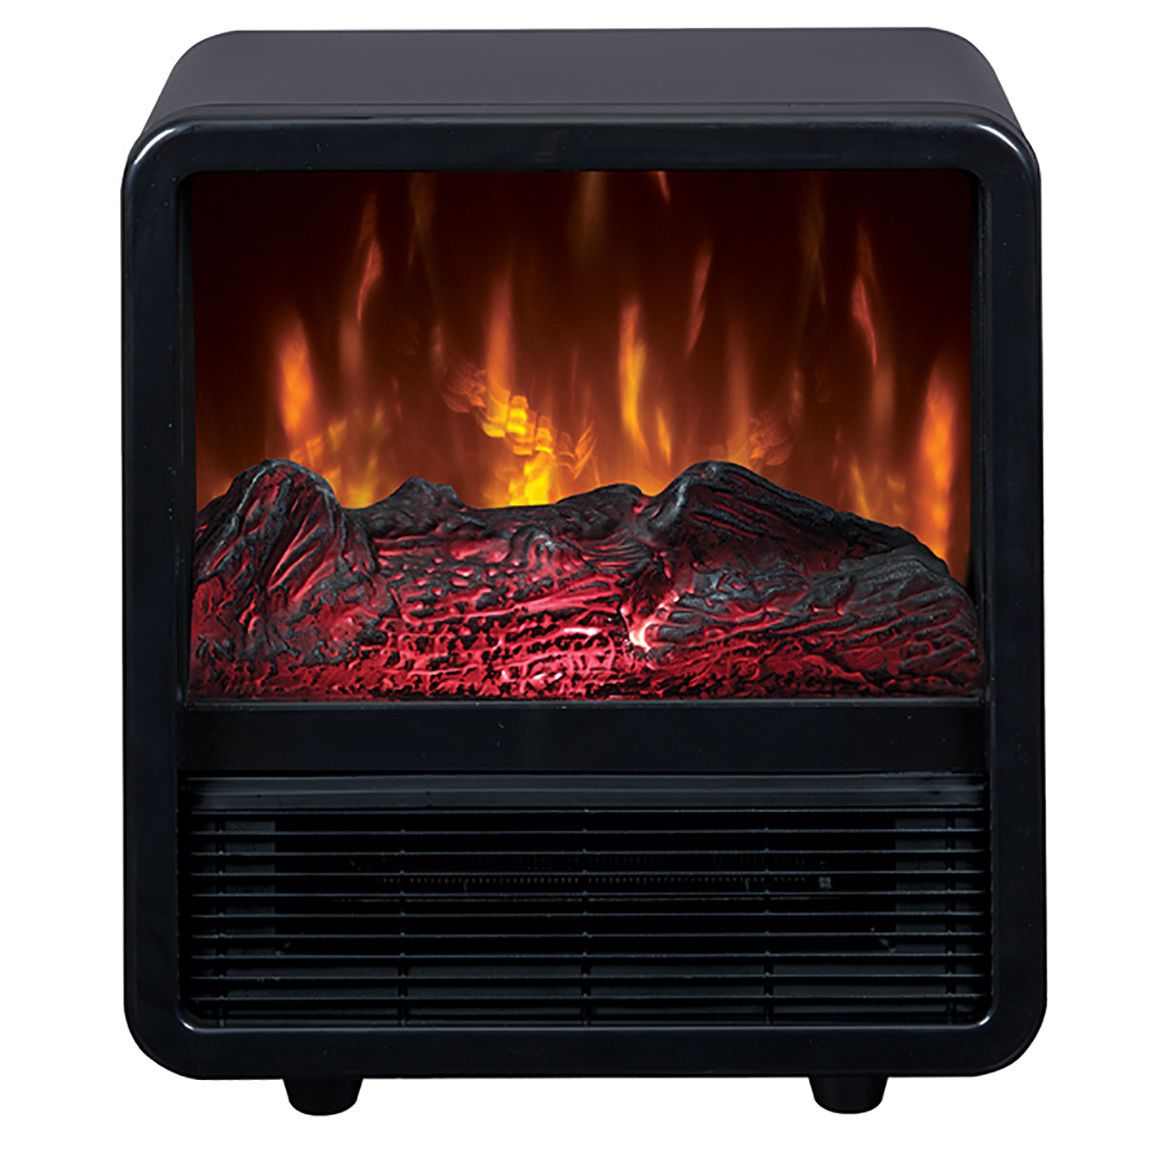 Duraflame Fireplace Insert Best Of Duraflame Cfs 300 Blk Portable Electric Personal Space